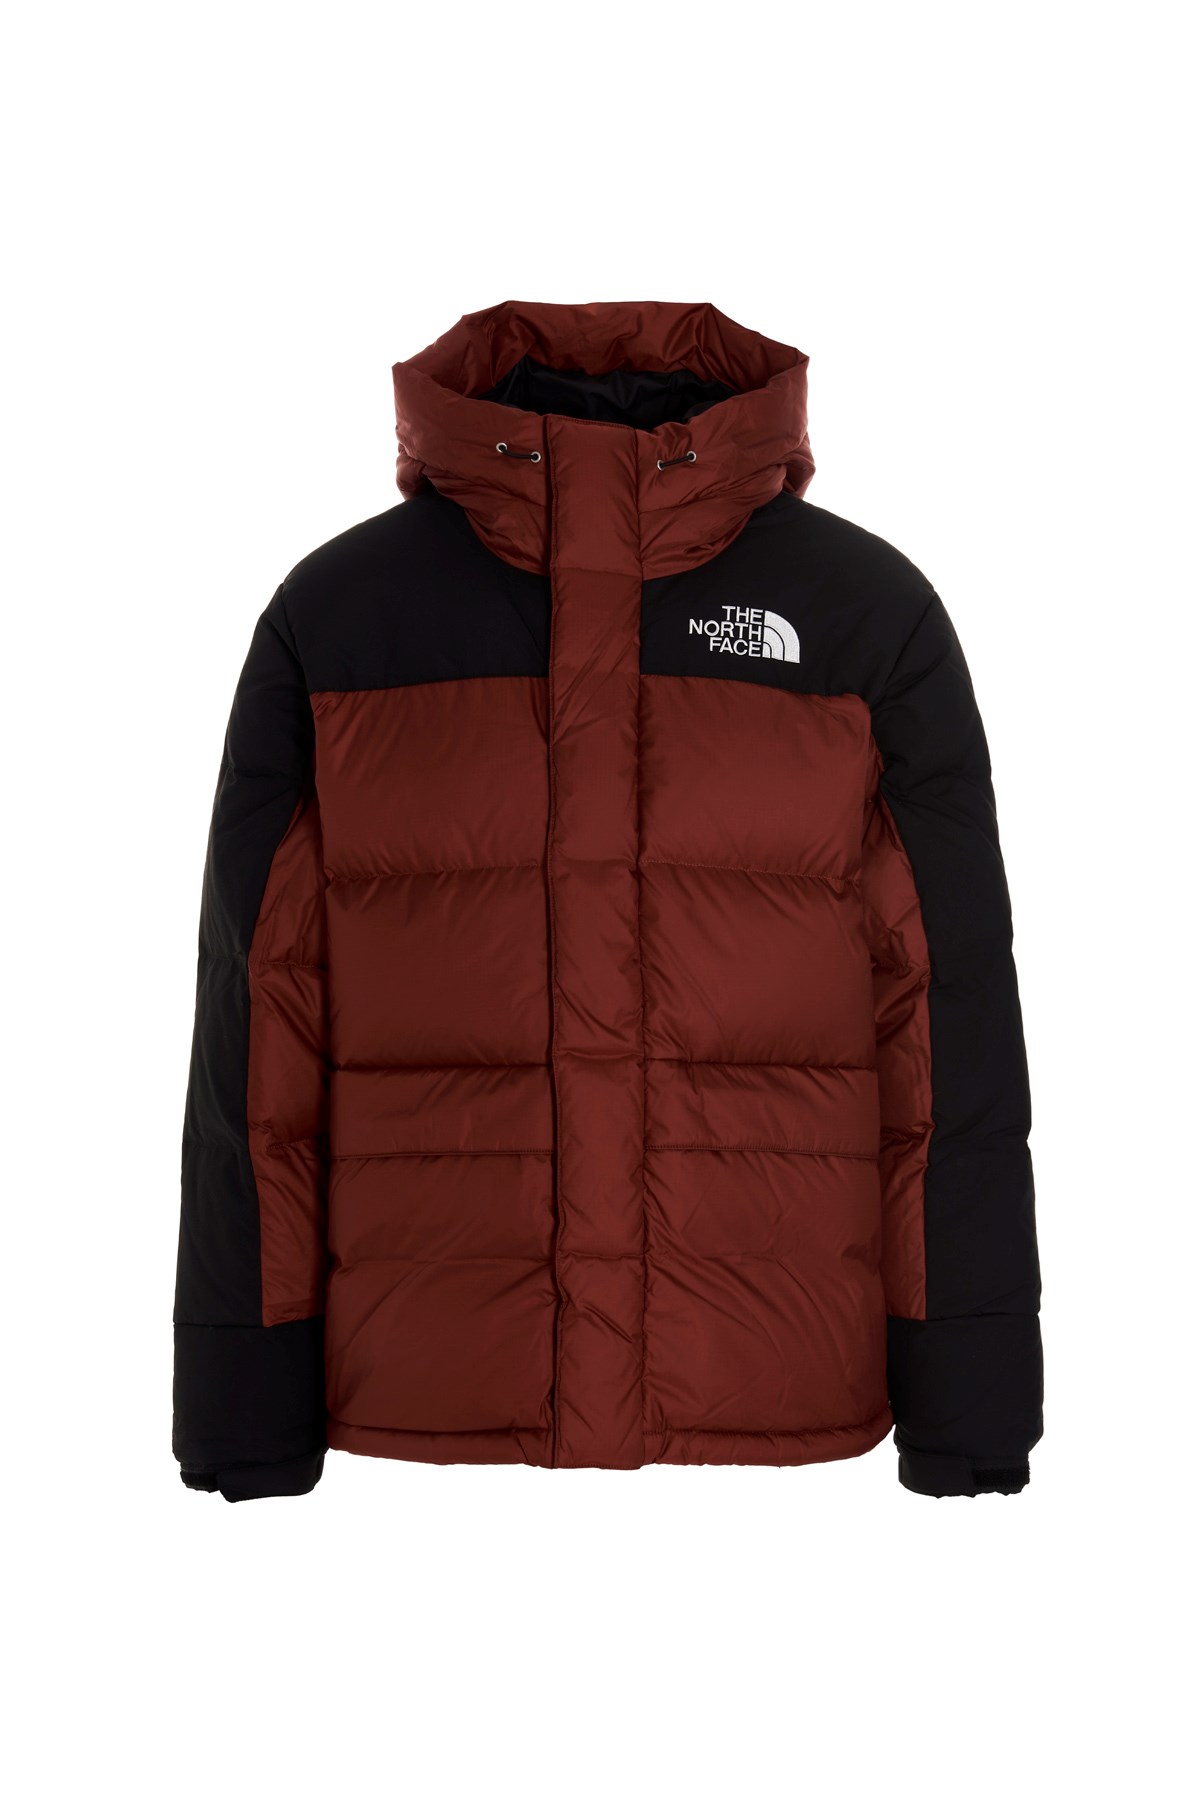 THE NORTH FACE 'Himalyan’ Puffer Jacket